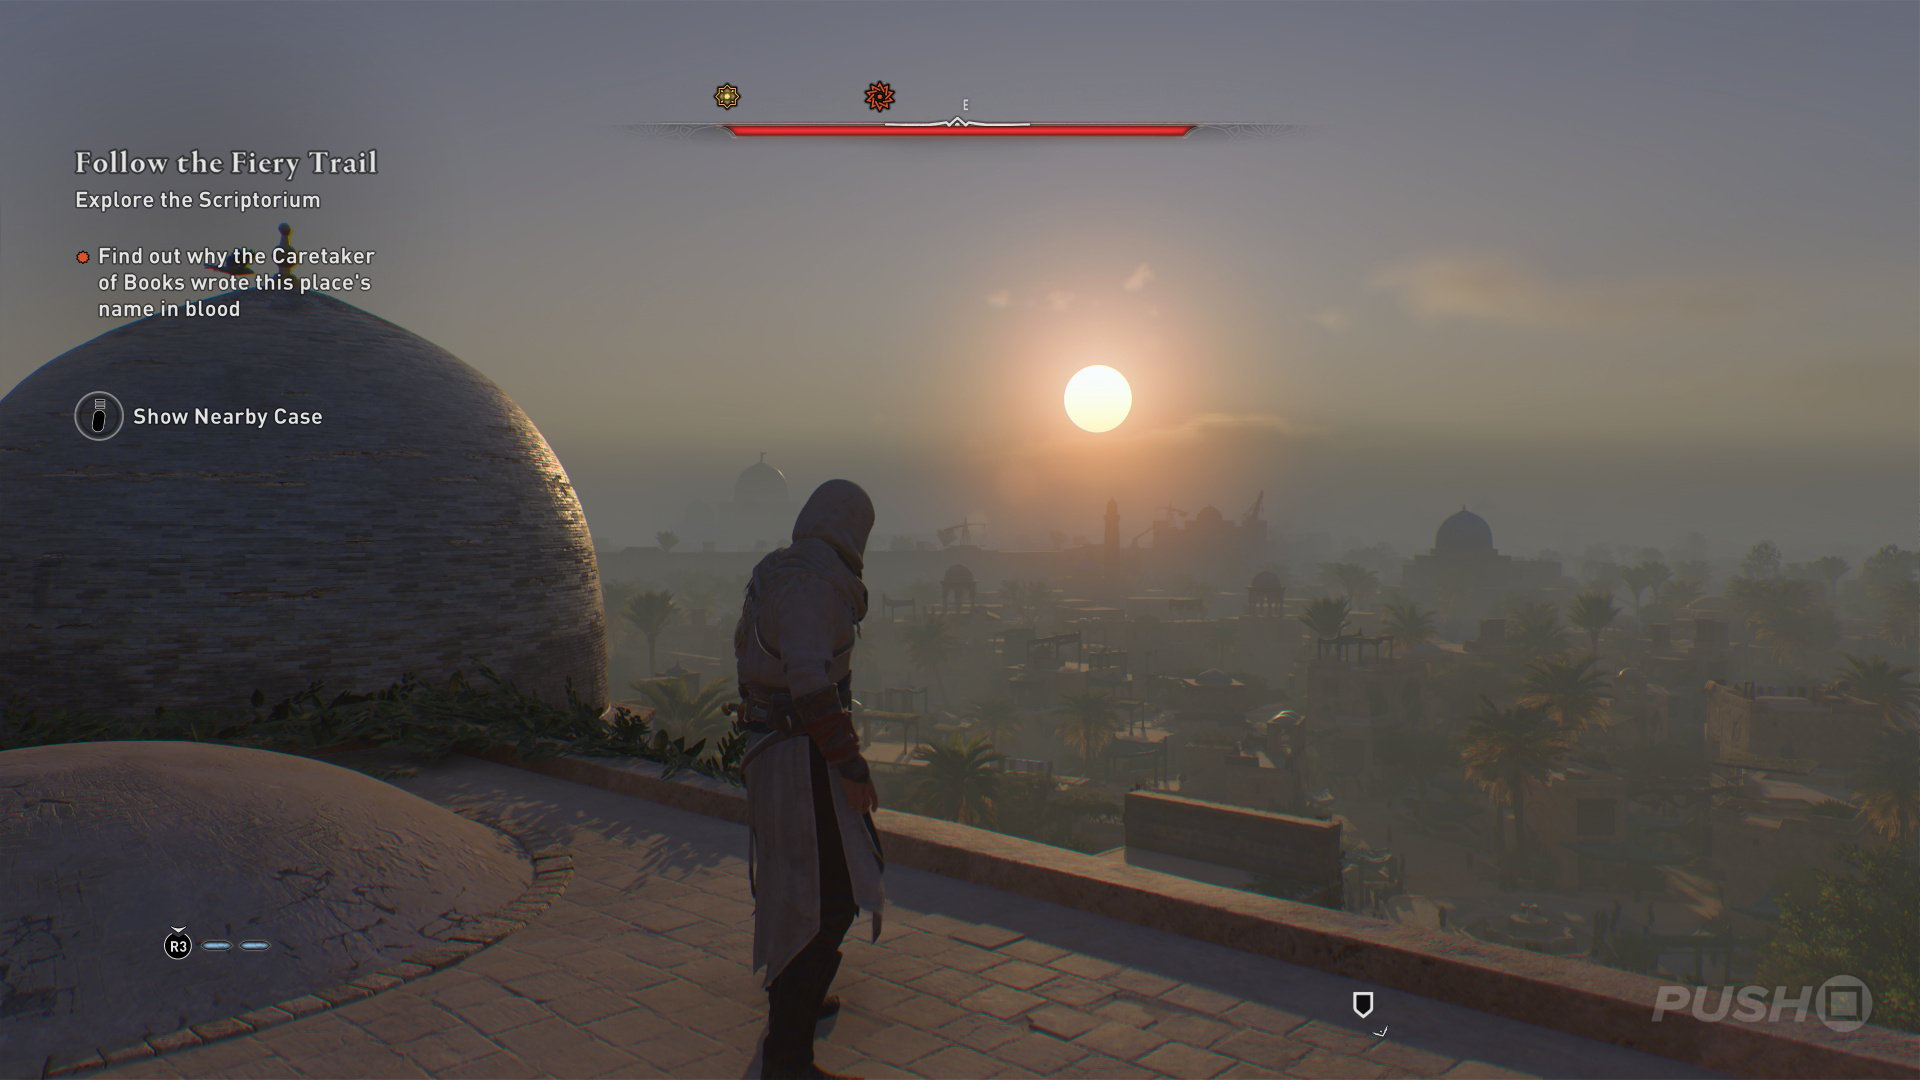 Assassin's Creed Mirage review: For better or worse